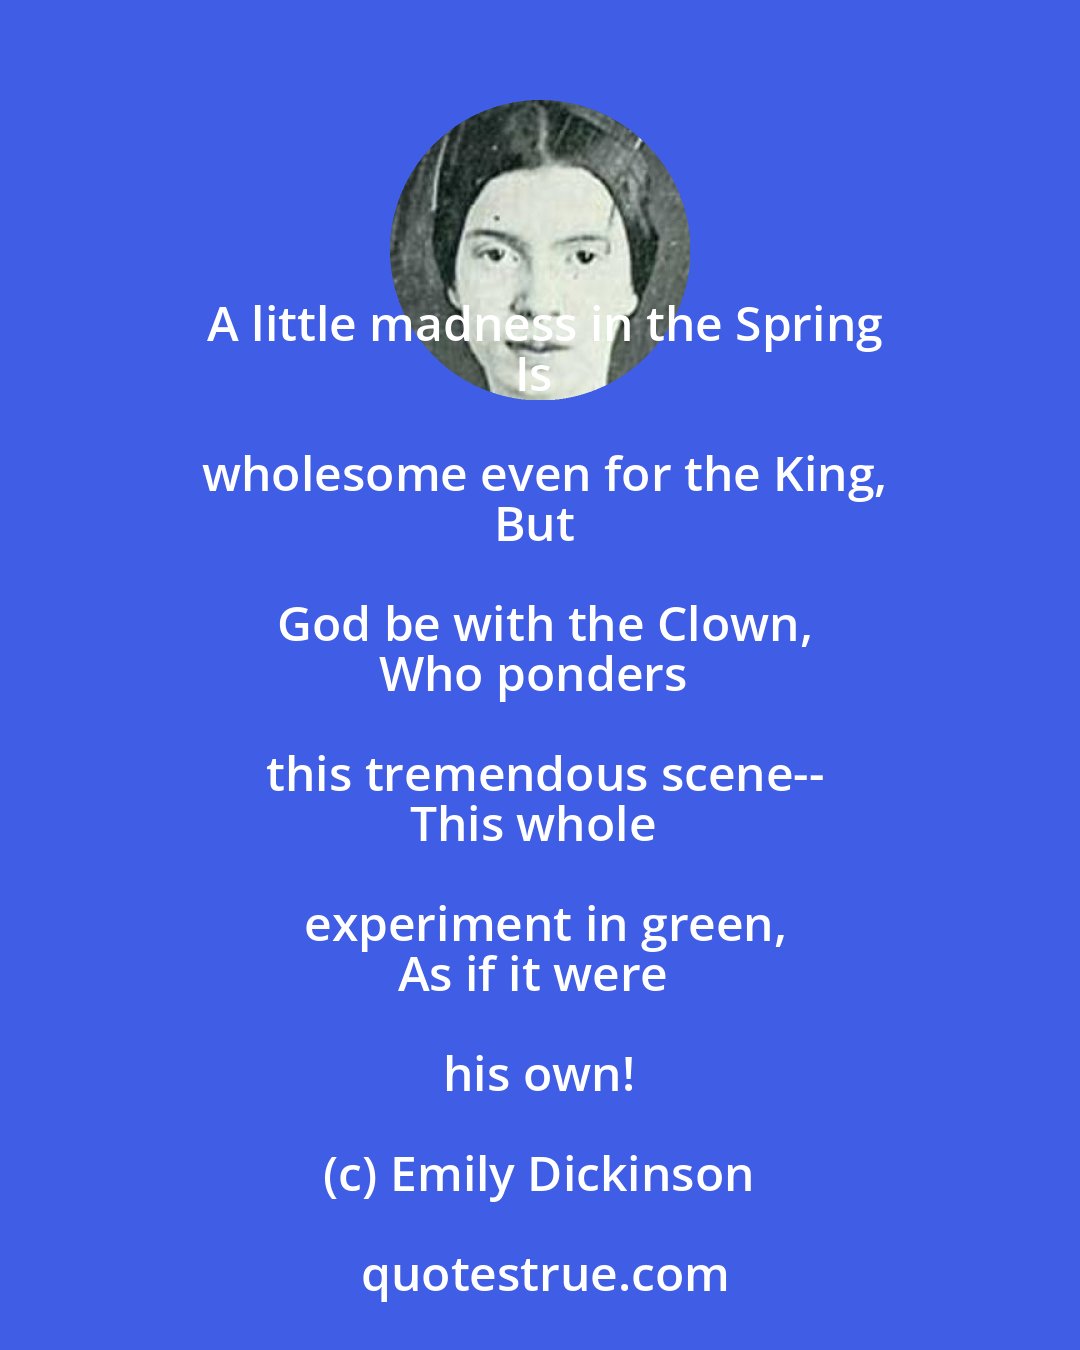 Emily Dickinson: A little madness in the Spring
Is wholesome even for the King,
But God be with the Clown,
Who ponders this tremendous scene--
This whole experiment in green,
As if it were his own!